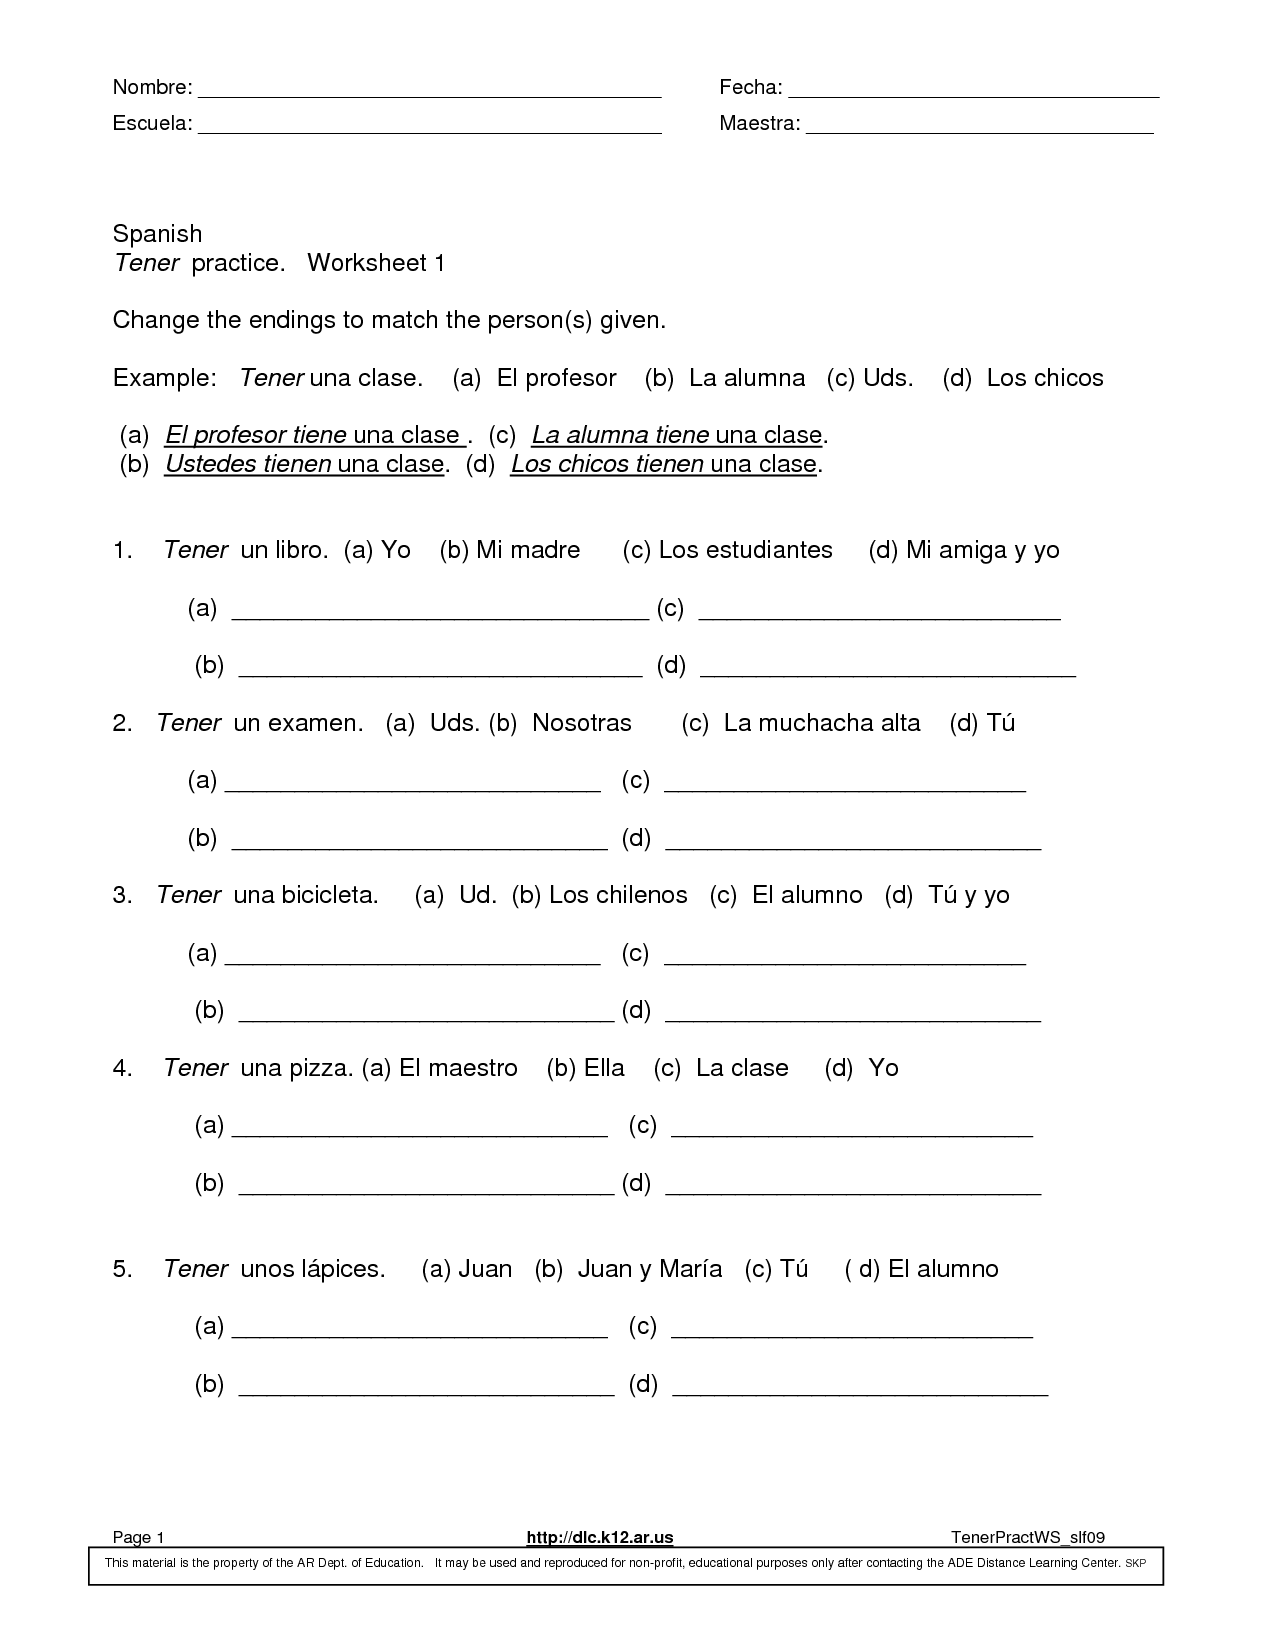 17-best-images-of-spanish-1-practice-worksheets-spanish-practice-worksheets-spanish-numbers